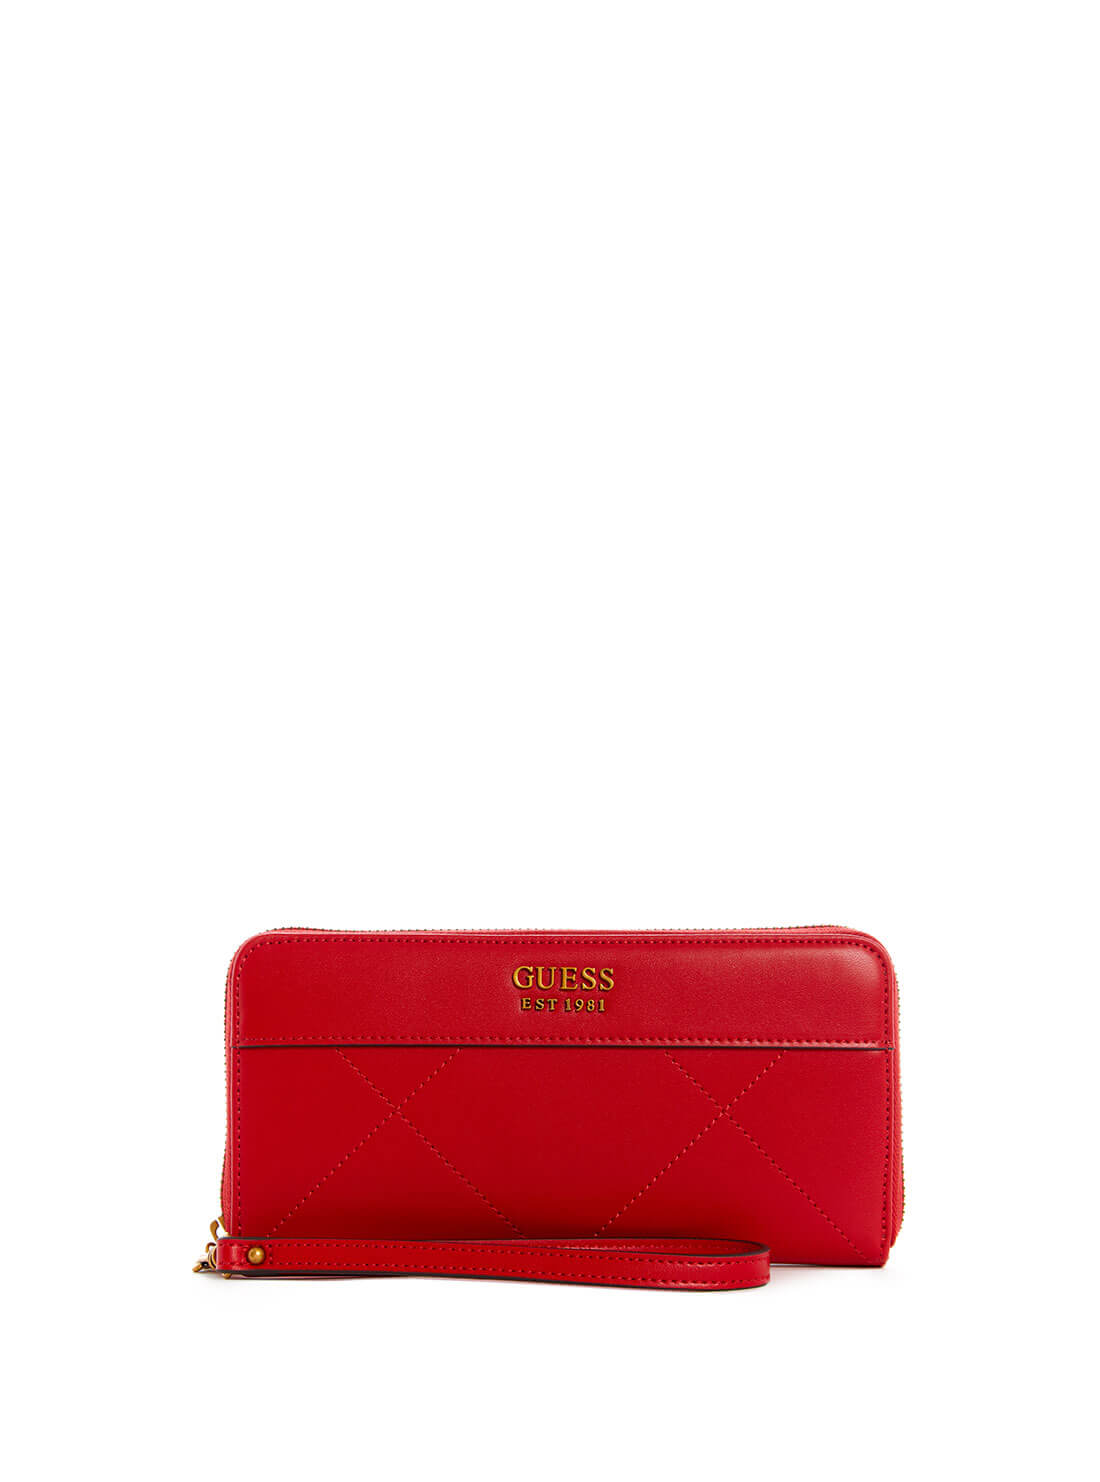 GUESS Womens Red Katey Large Wallet QA787046 Front View